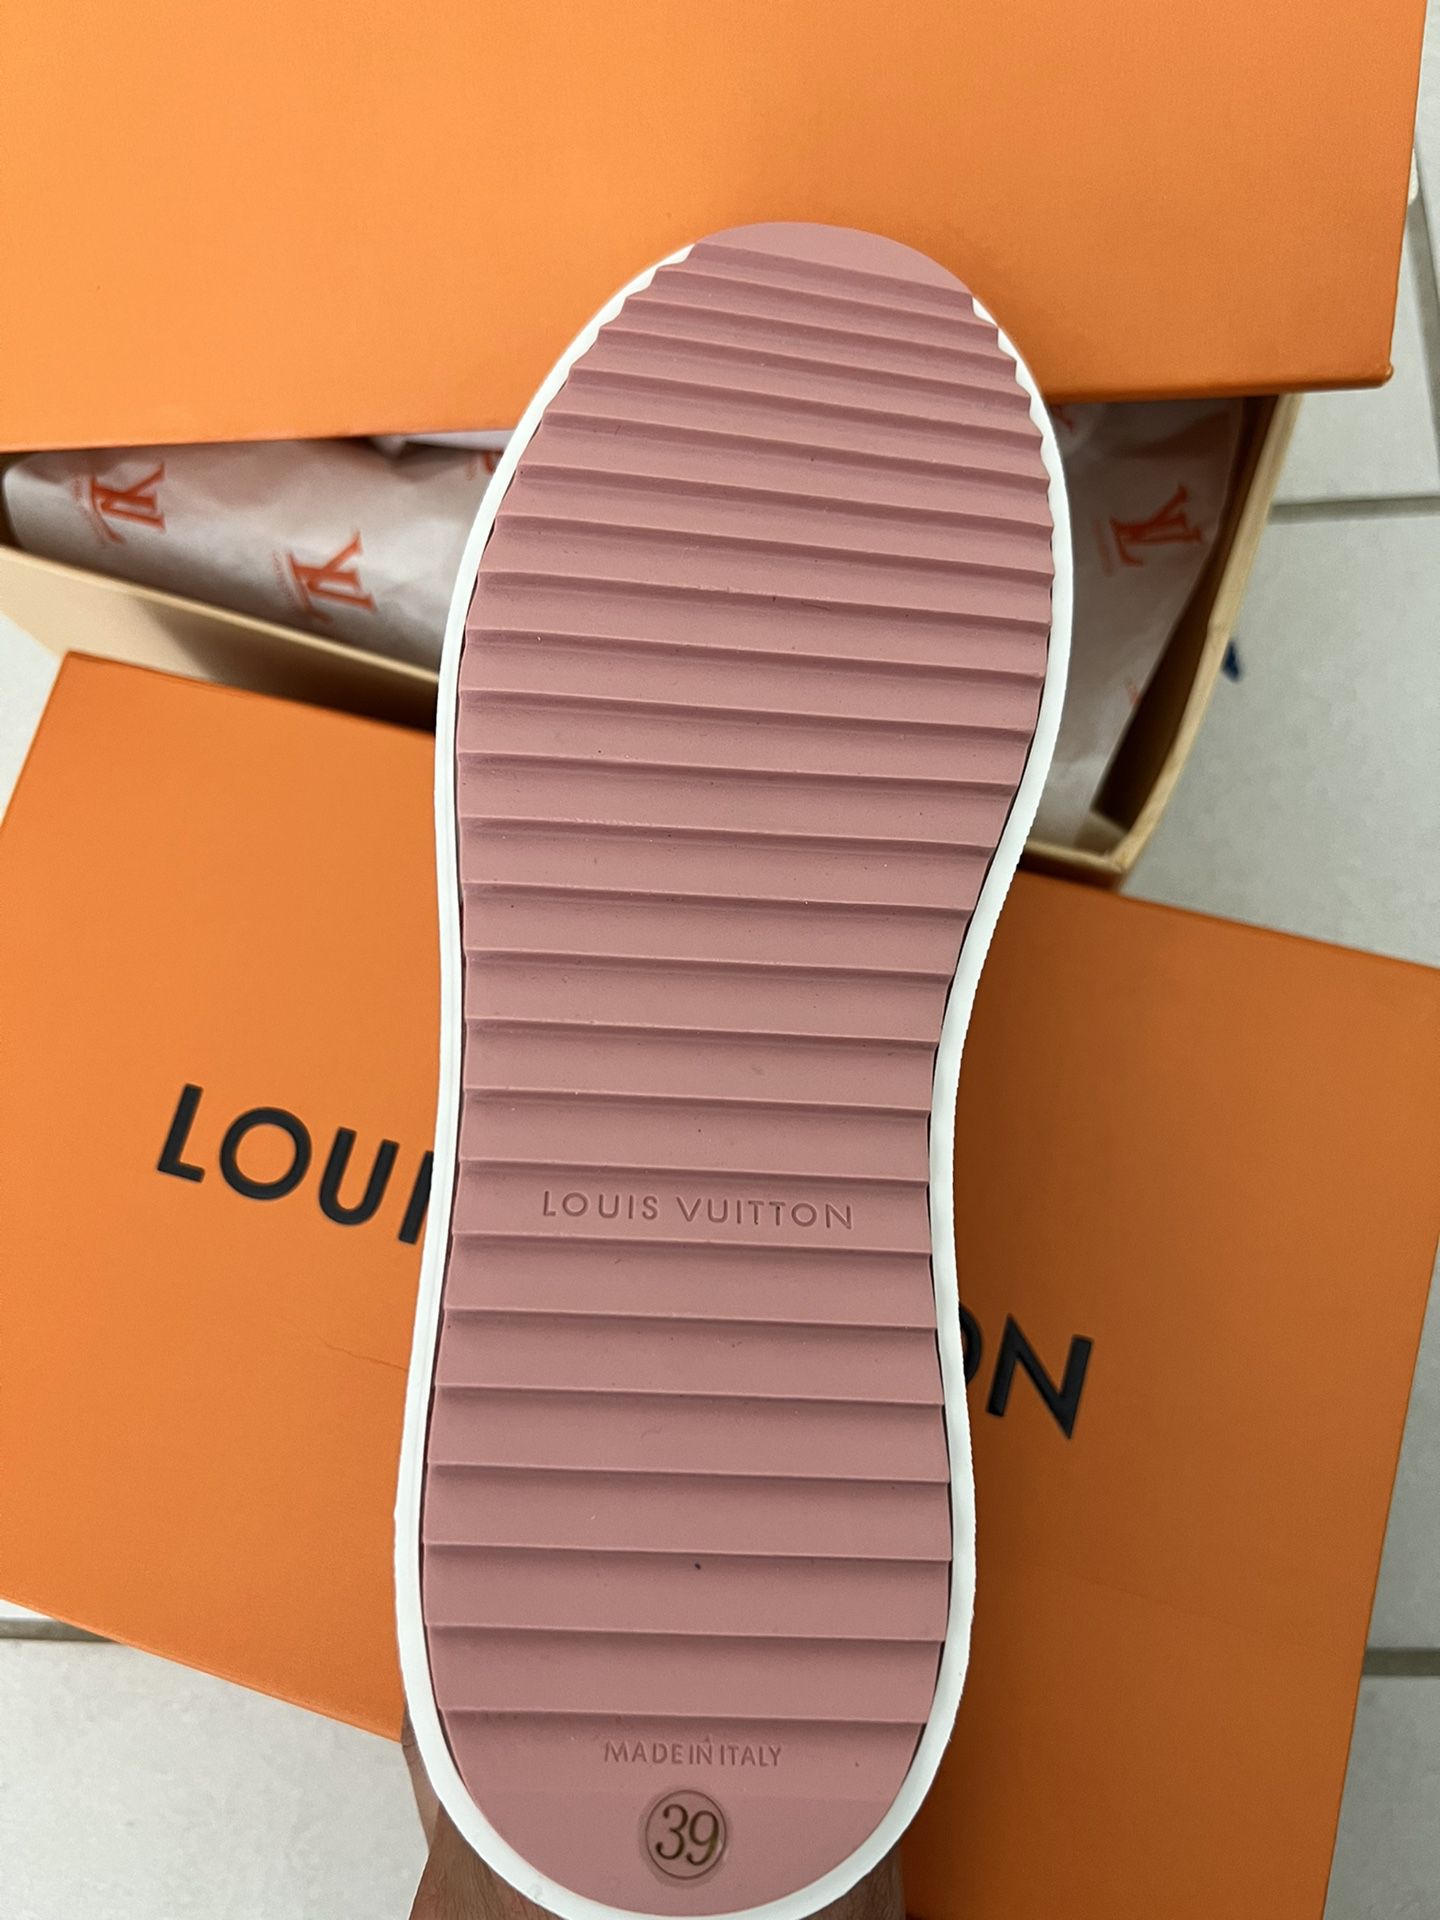 LV Limitless Shoes EU39 for Sale in Fort Lauderdale, FL - OfferUp